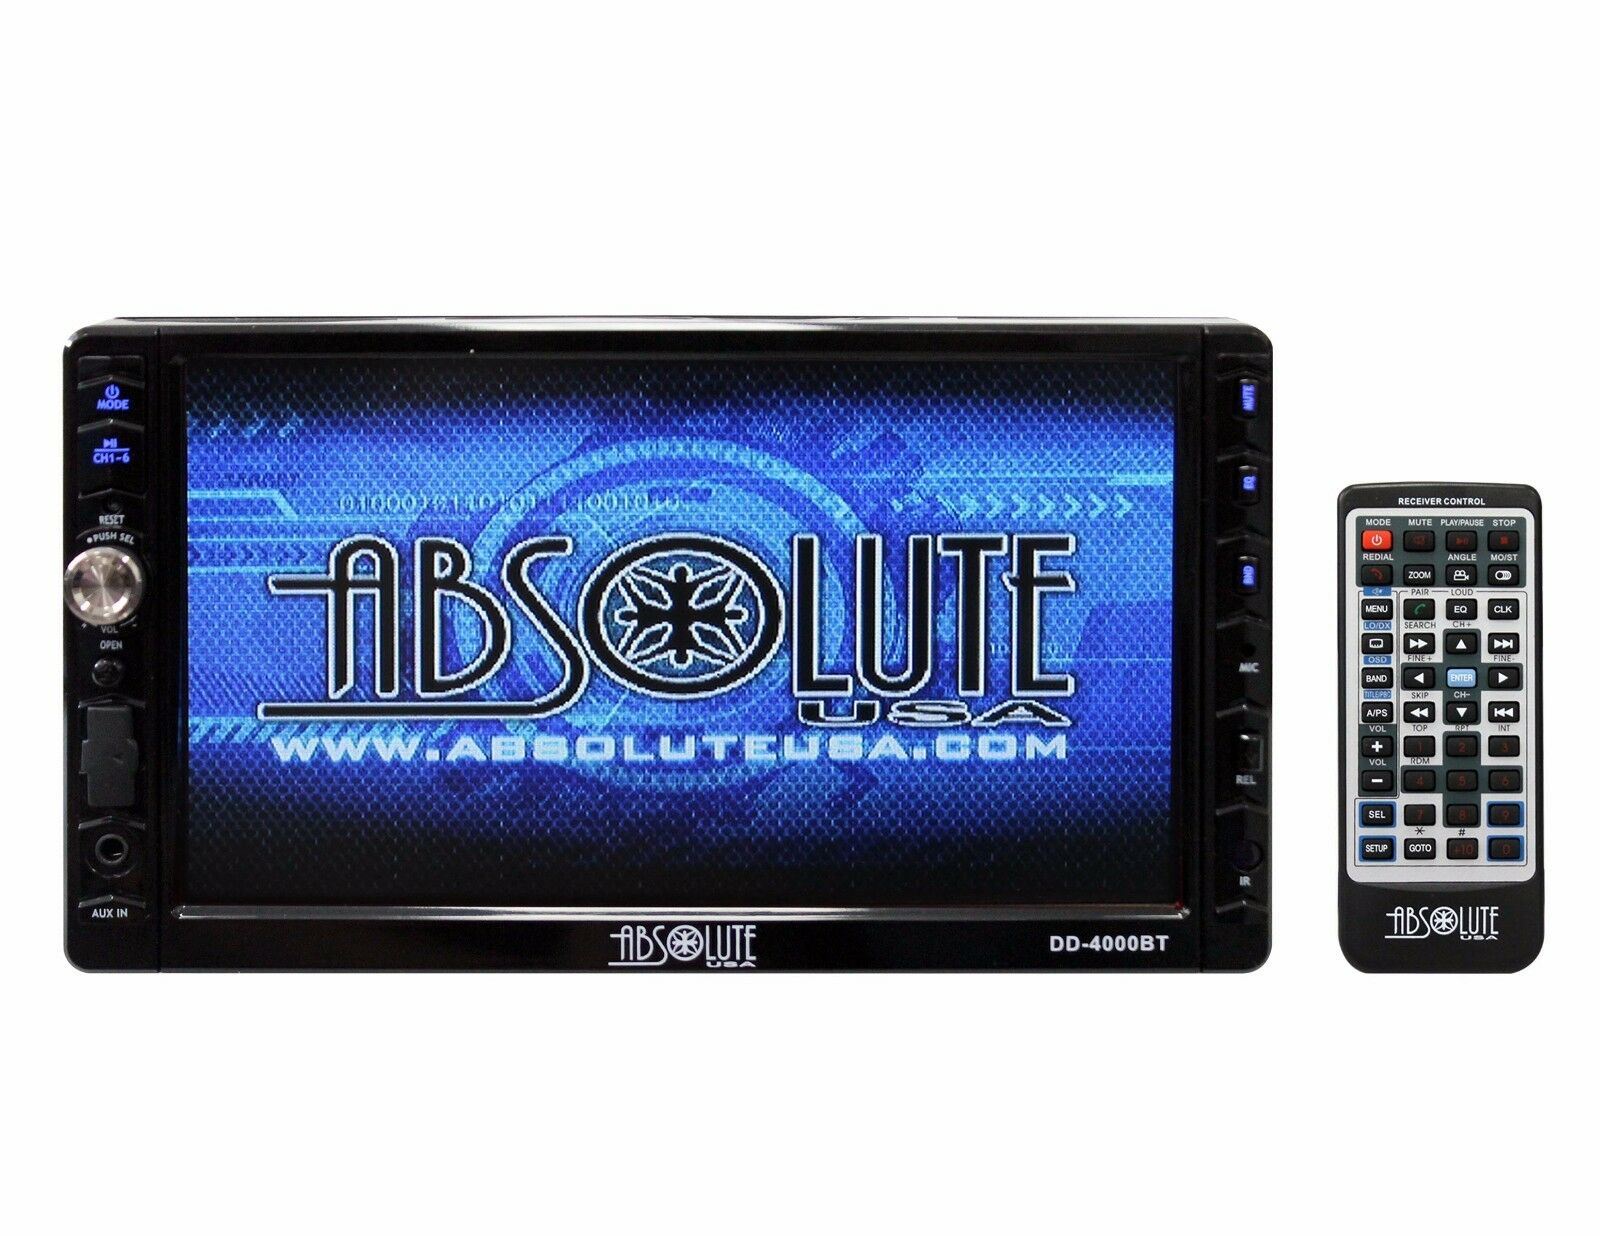 Absolute DD-4000BT 7-Inch Double Din DVD / CD / MP3 / USB / BLUETOOTH / TOUCH - image 3 of 3